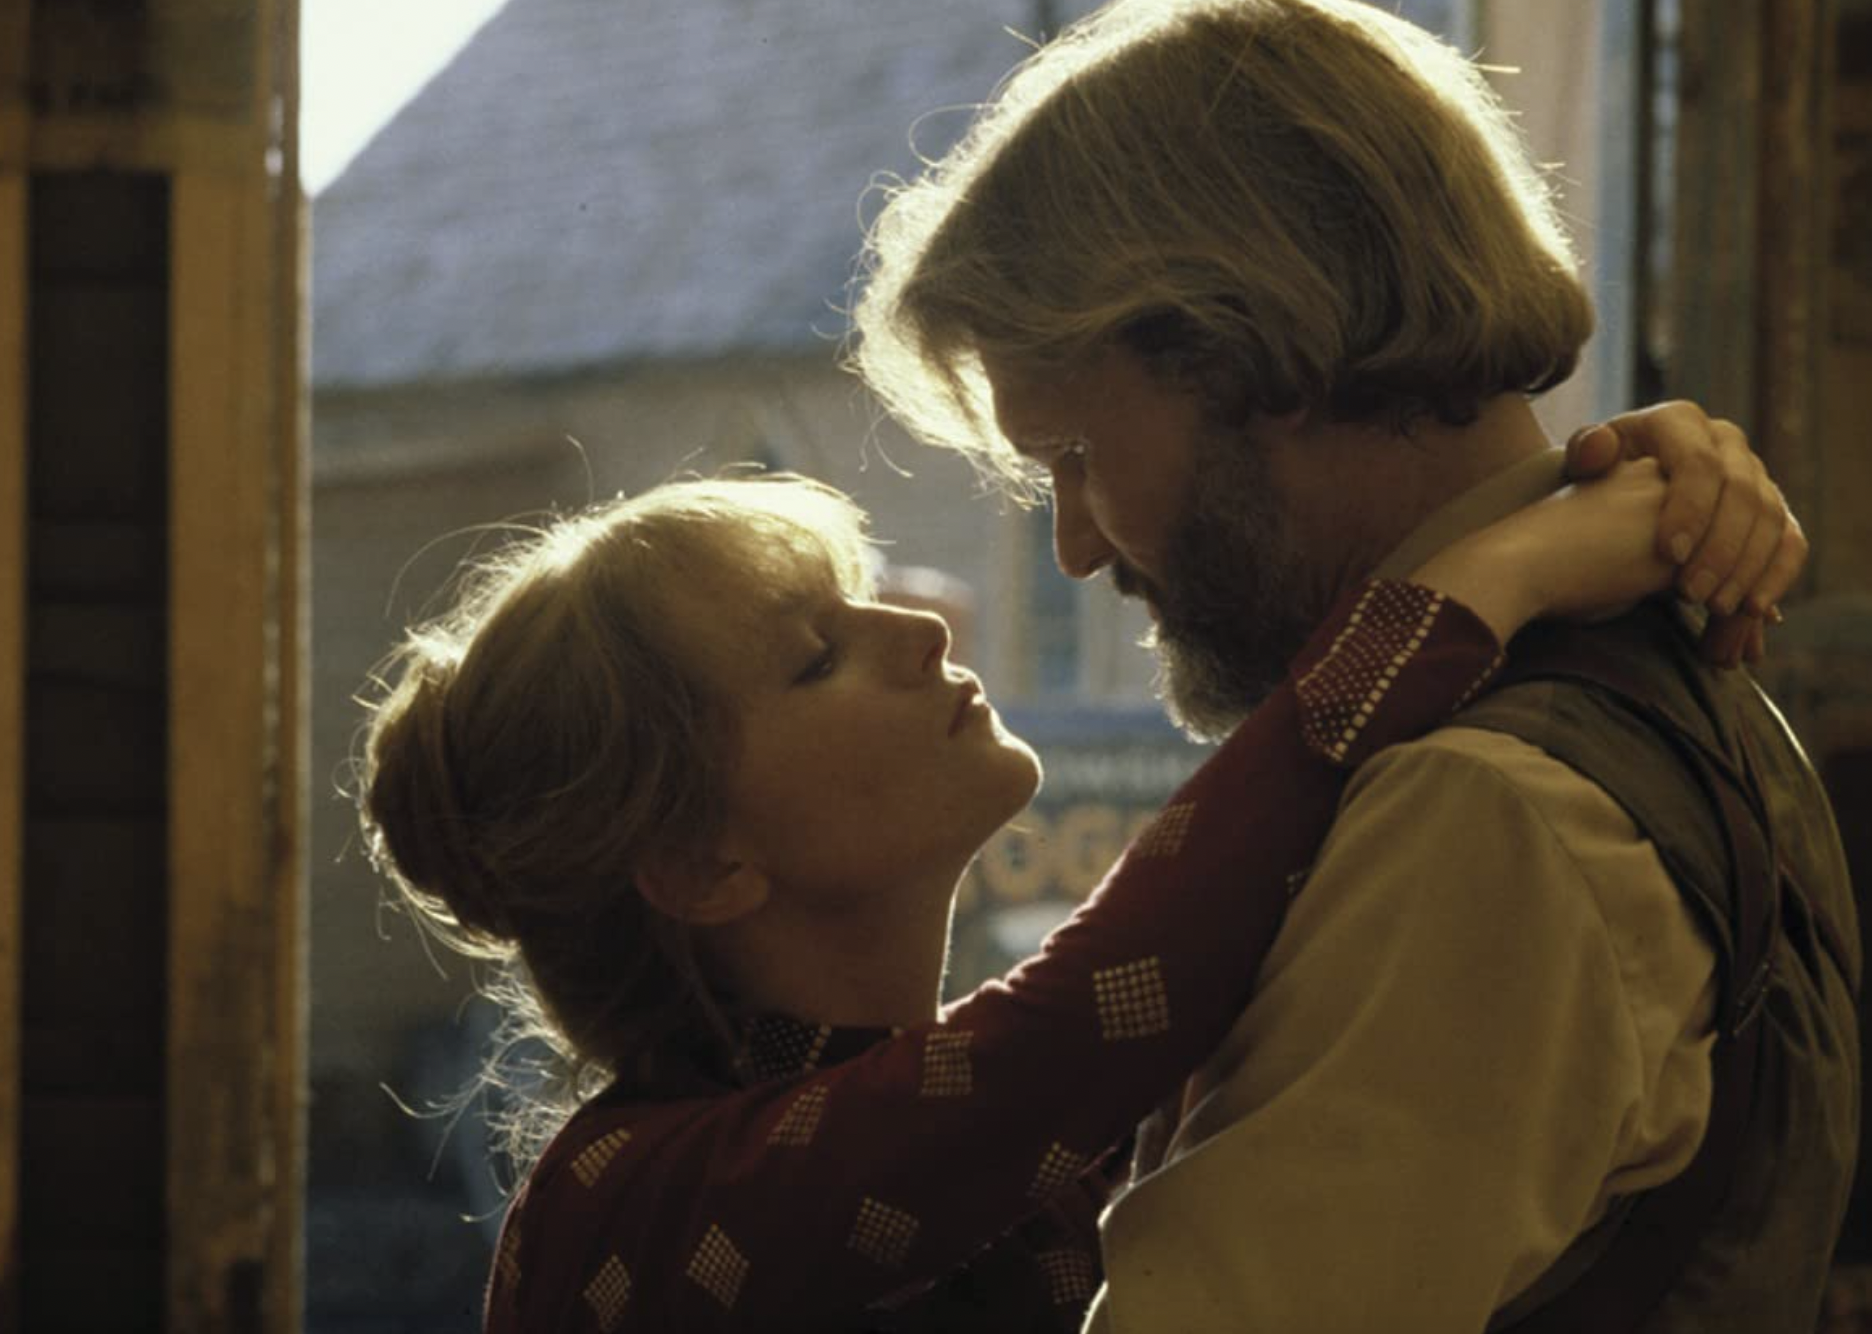 Isabelle Huppert and Kris Kristofferson in "Heaven's Gate".